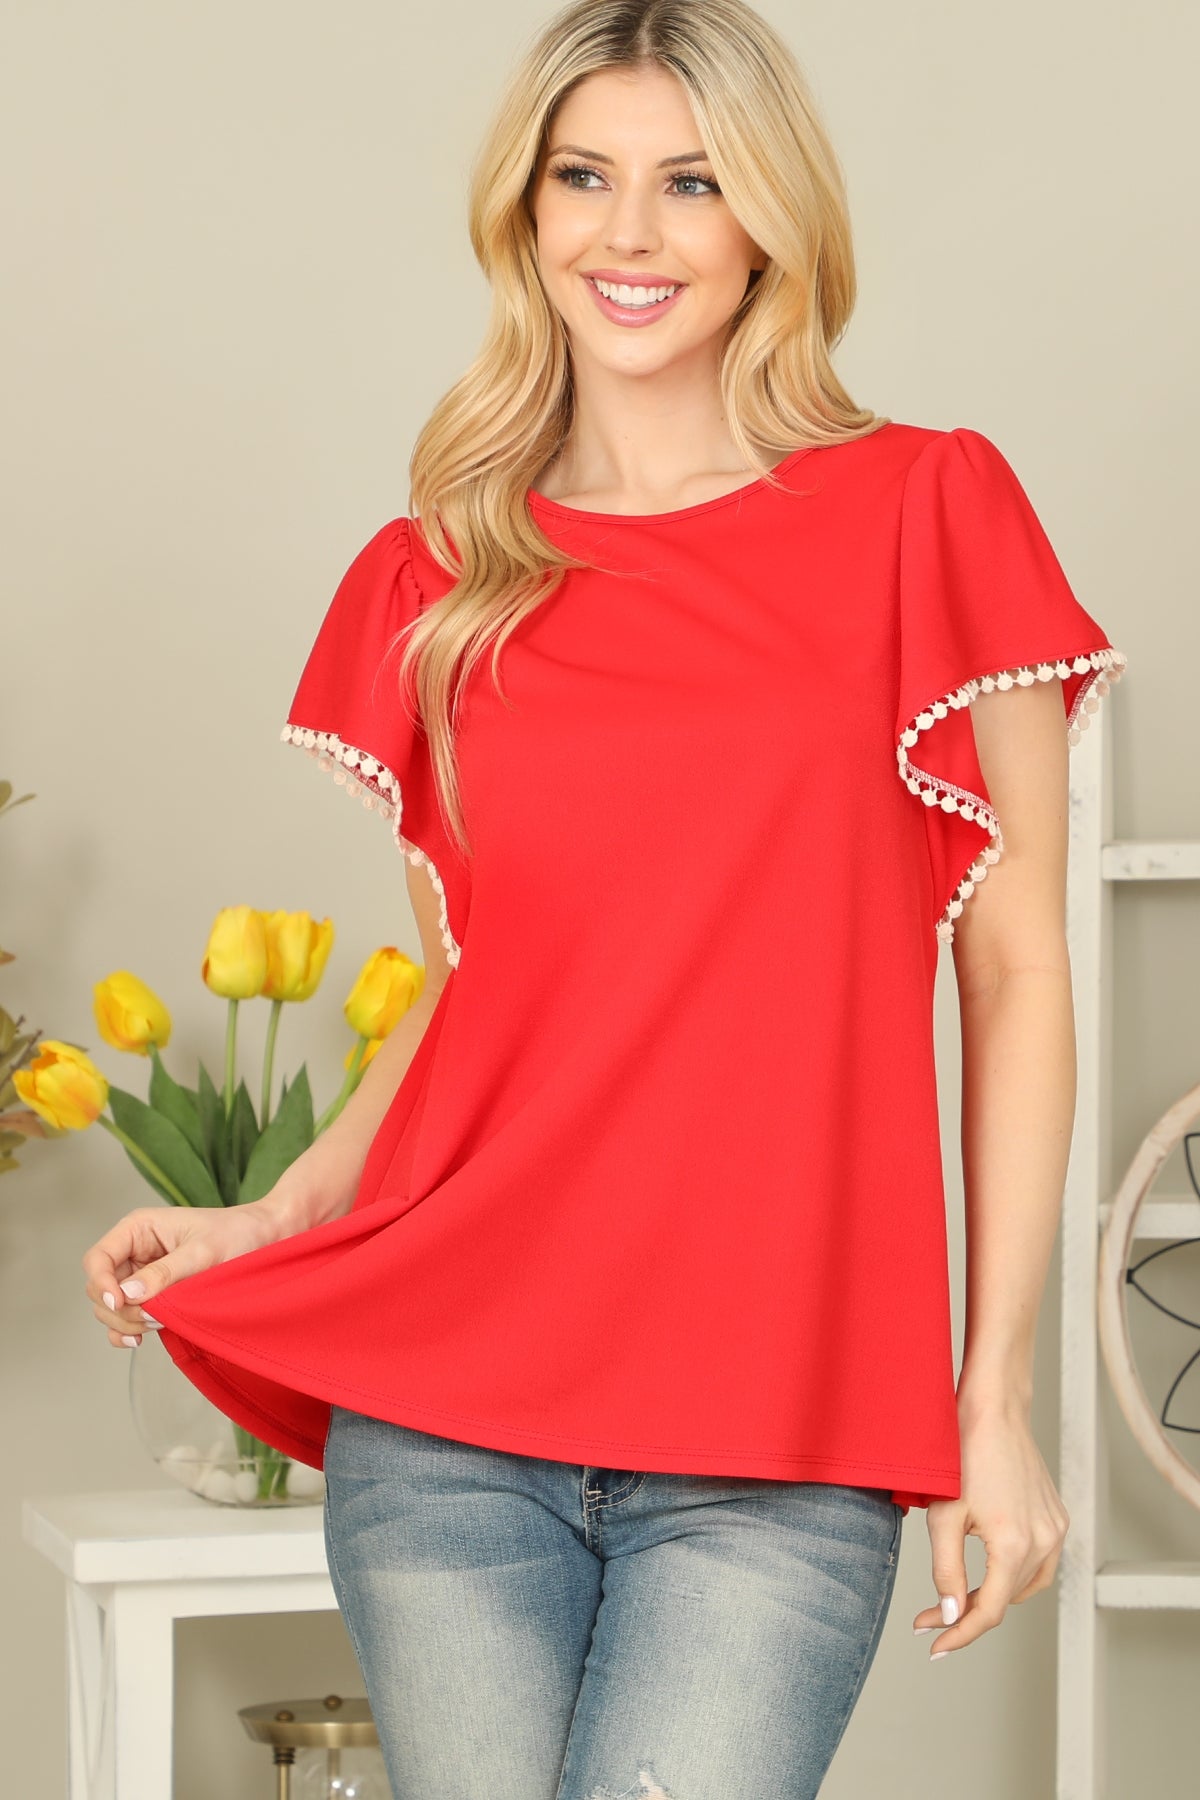 POMPOM DETAIL BUTTERFLY SLEEVE TOP 1-2-2-2